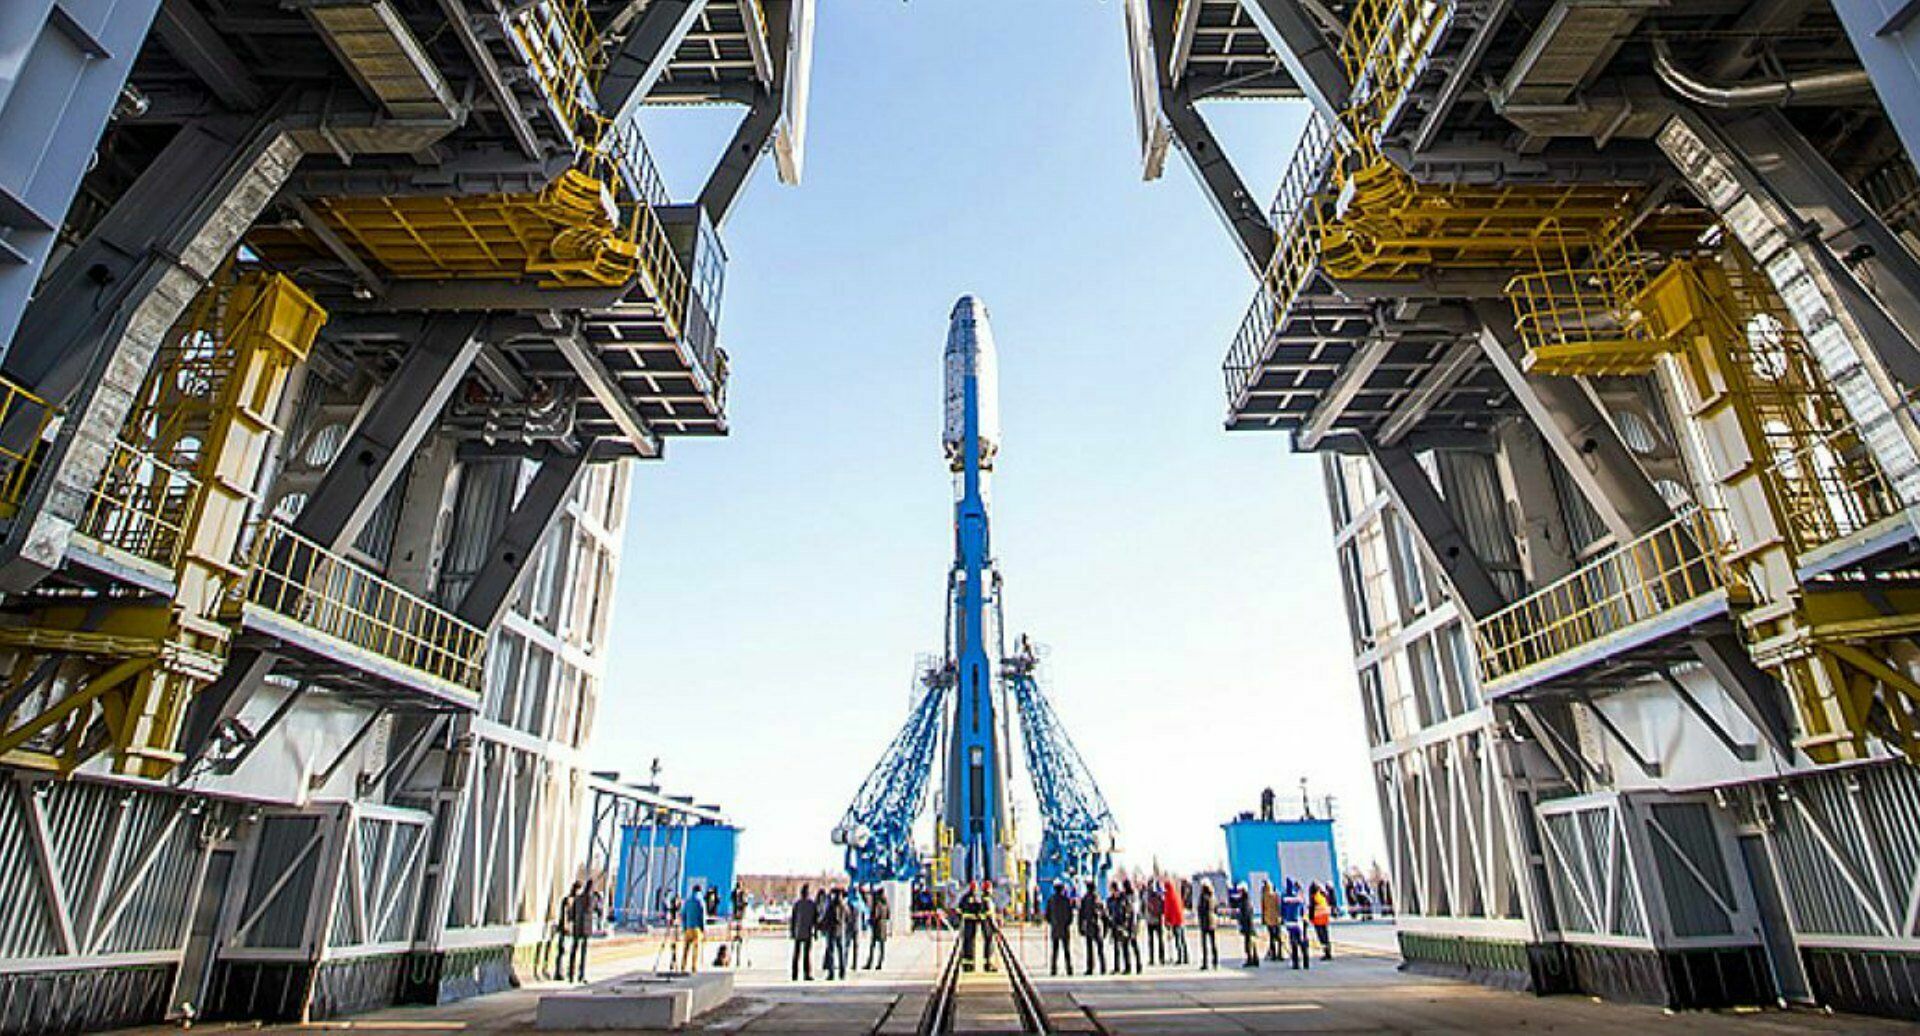 Roscosmos IT Specialist Condemned for Threating the Security of the Vostochny Cosmodrome